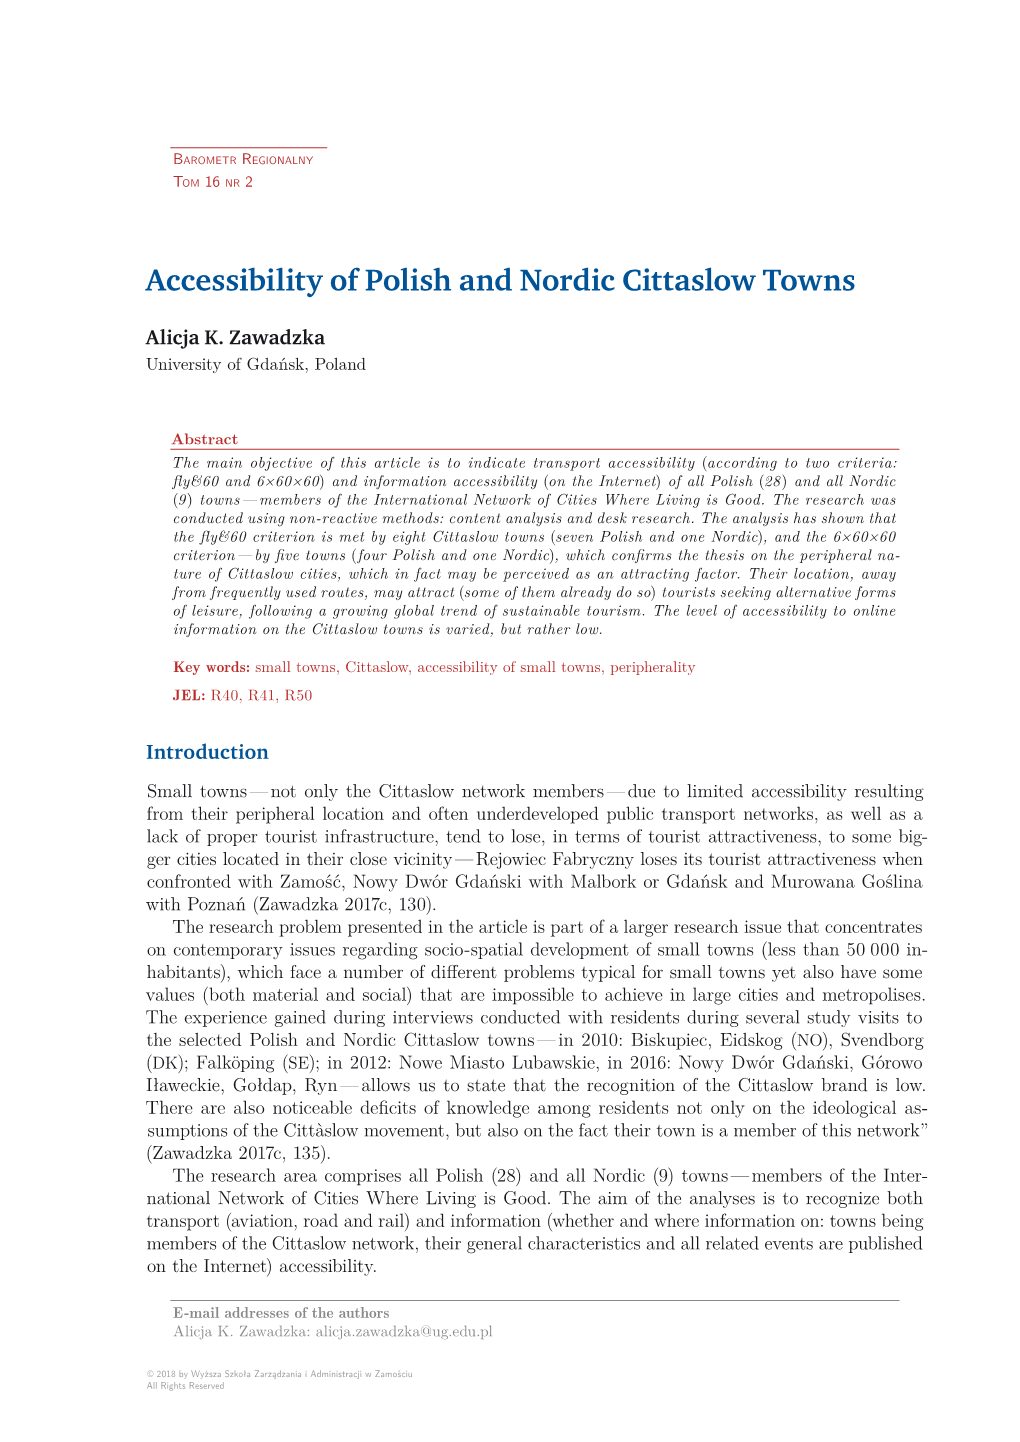 Accessibility of Polish and Nordic Cittaslow Towns